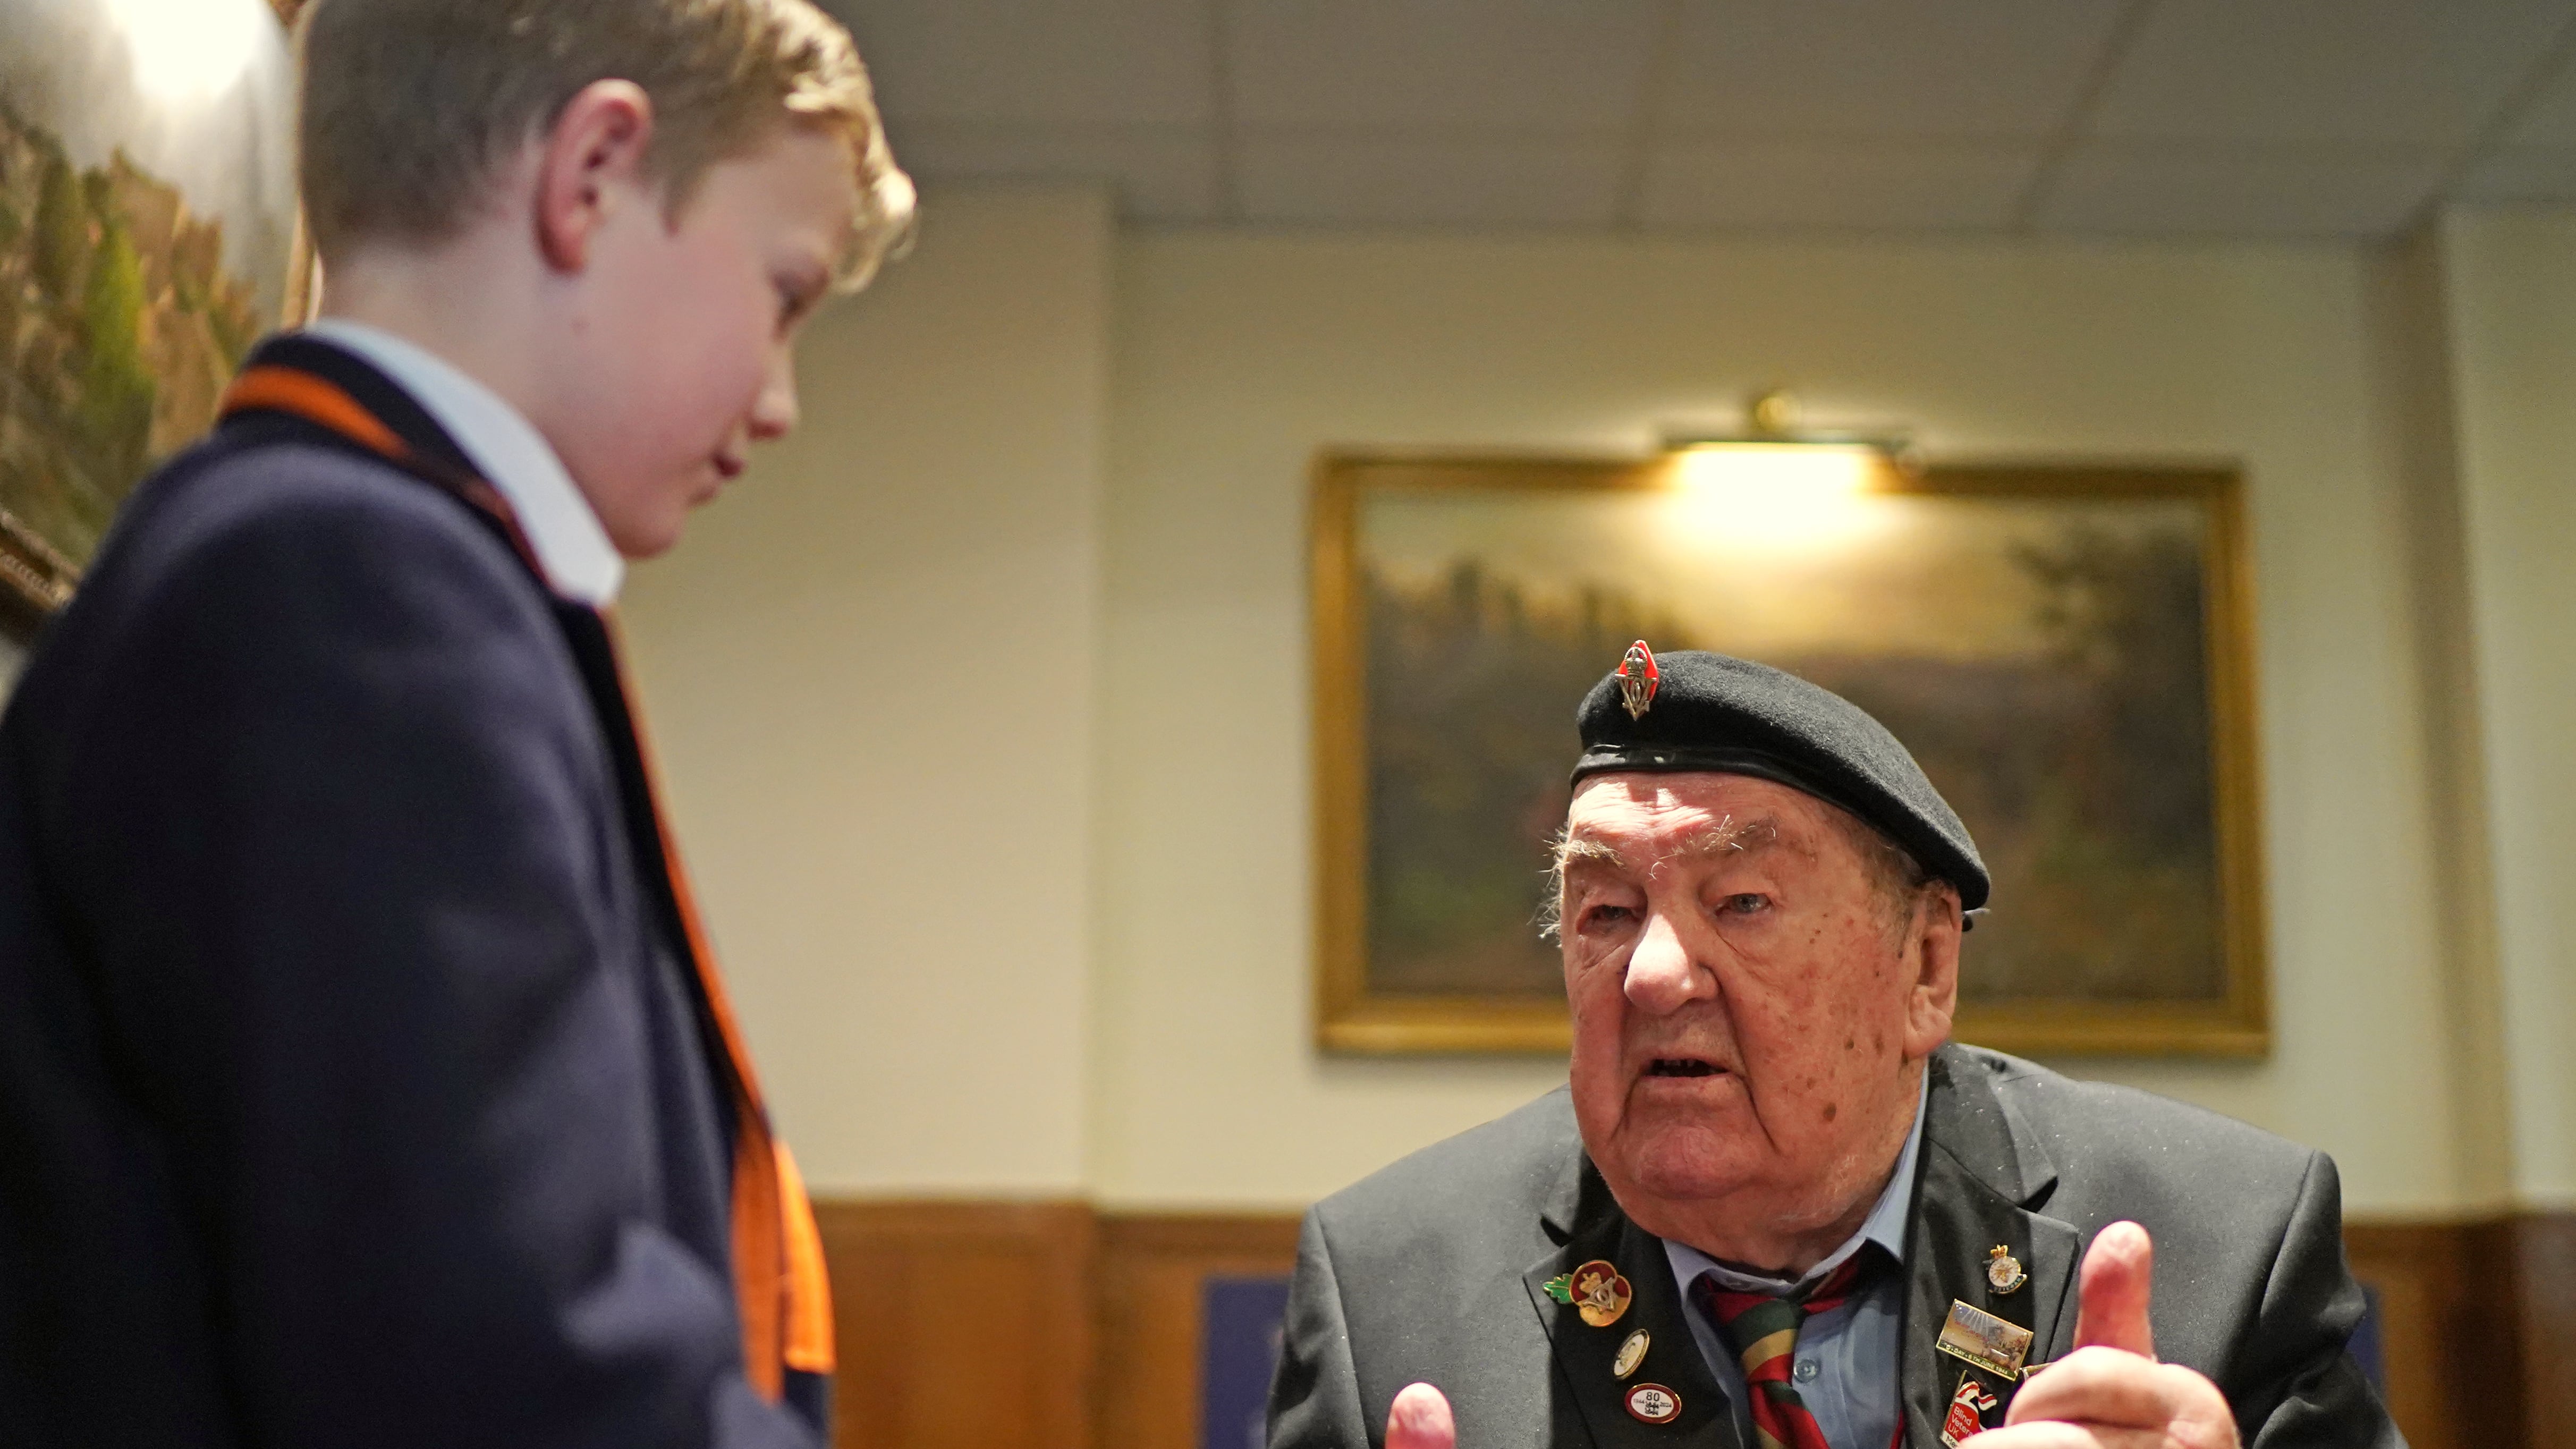 D-Day veterans Richard Aldred, 99, who served with the 7th Armoured Division of Royal Tank Regiment, meeting pupils from Norfolk House School